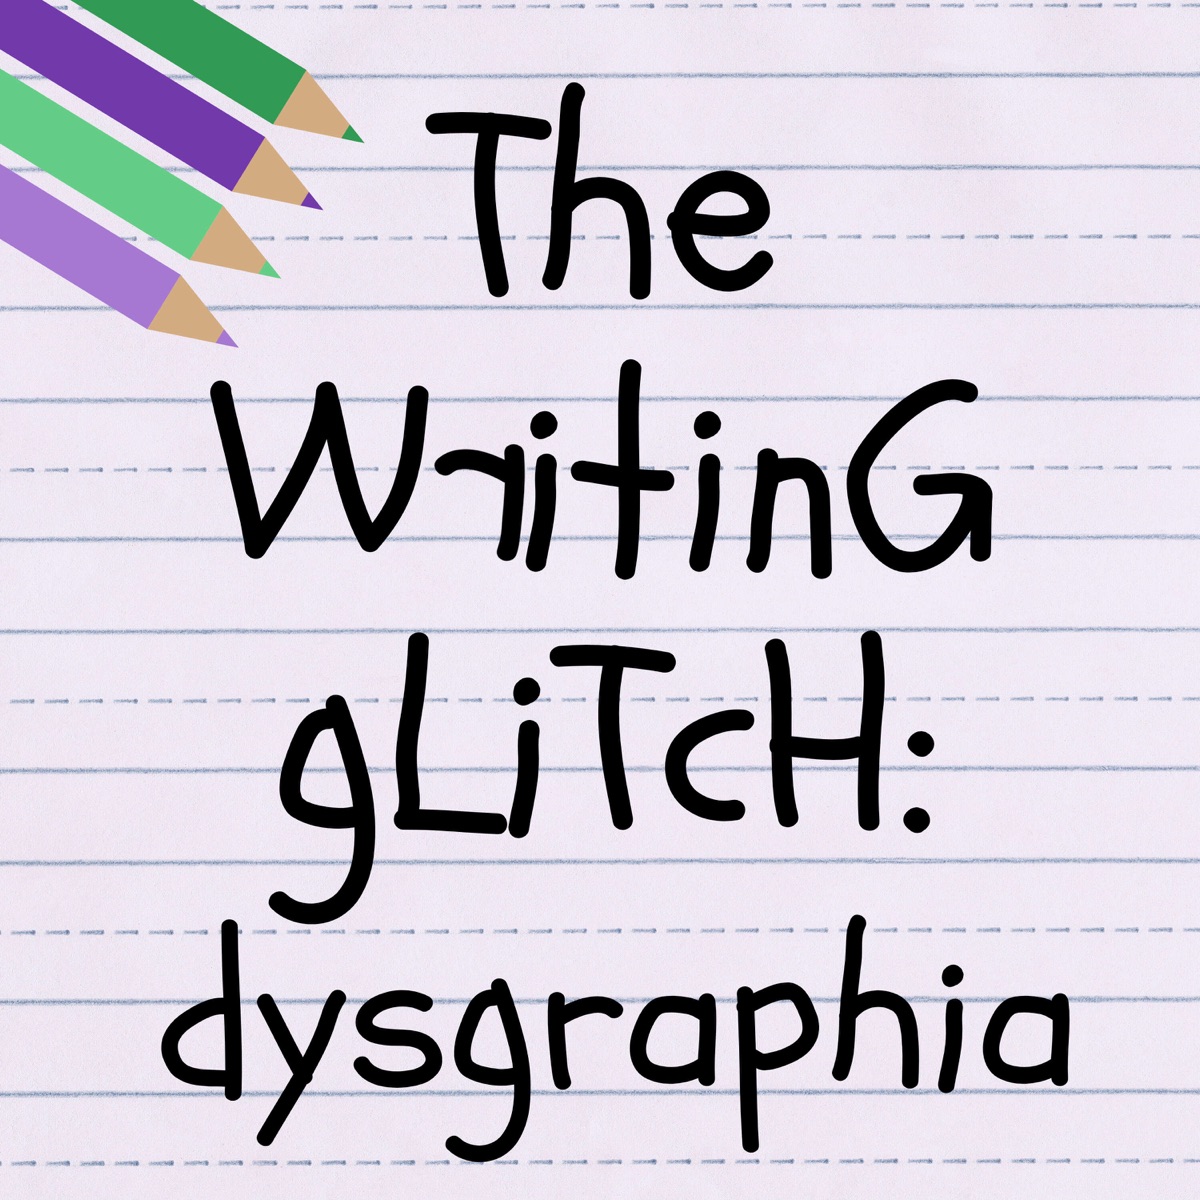 Adapted Handwriting Paper: Highlighted for Dysgraphia, Motor